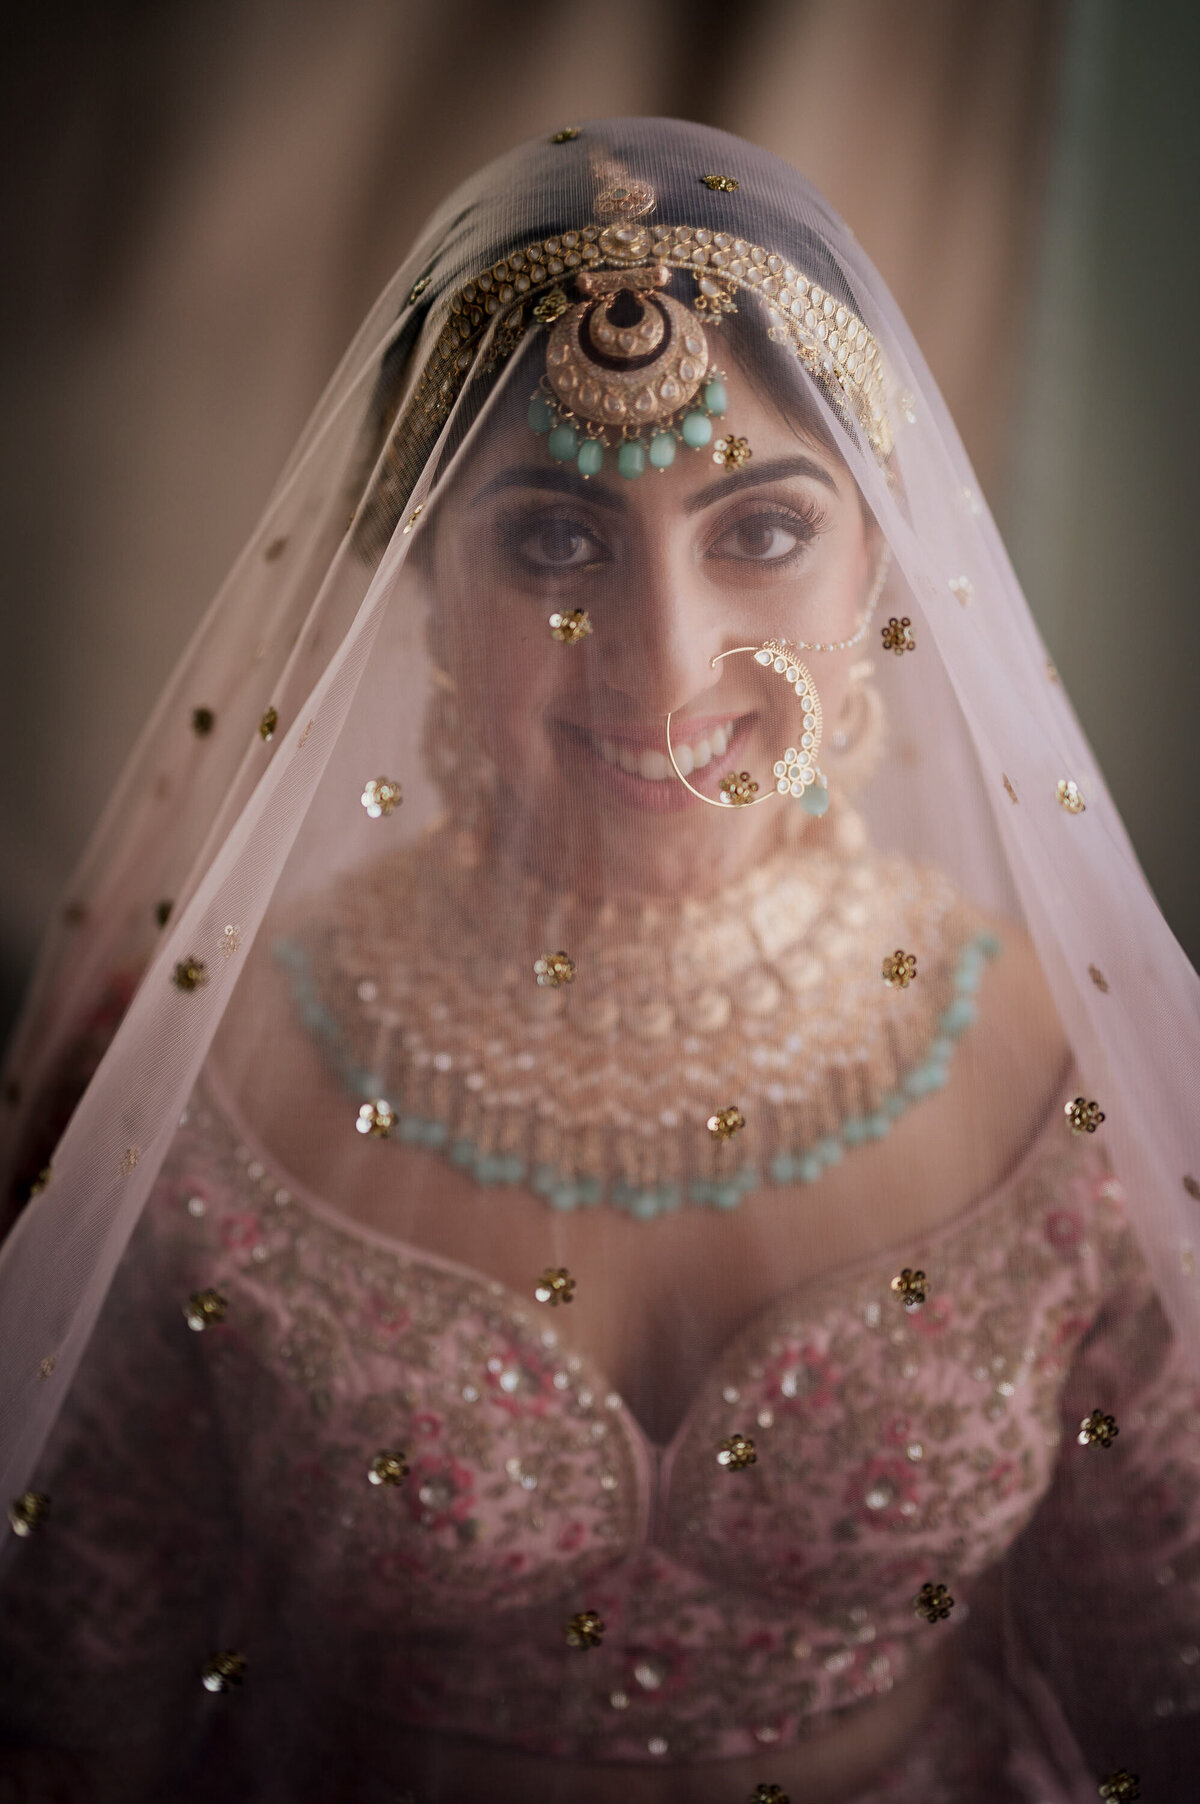 Get pricing info for Indian wedding photography in NJ & NYC. Contact Ishan Fotografi for a photography quote.